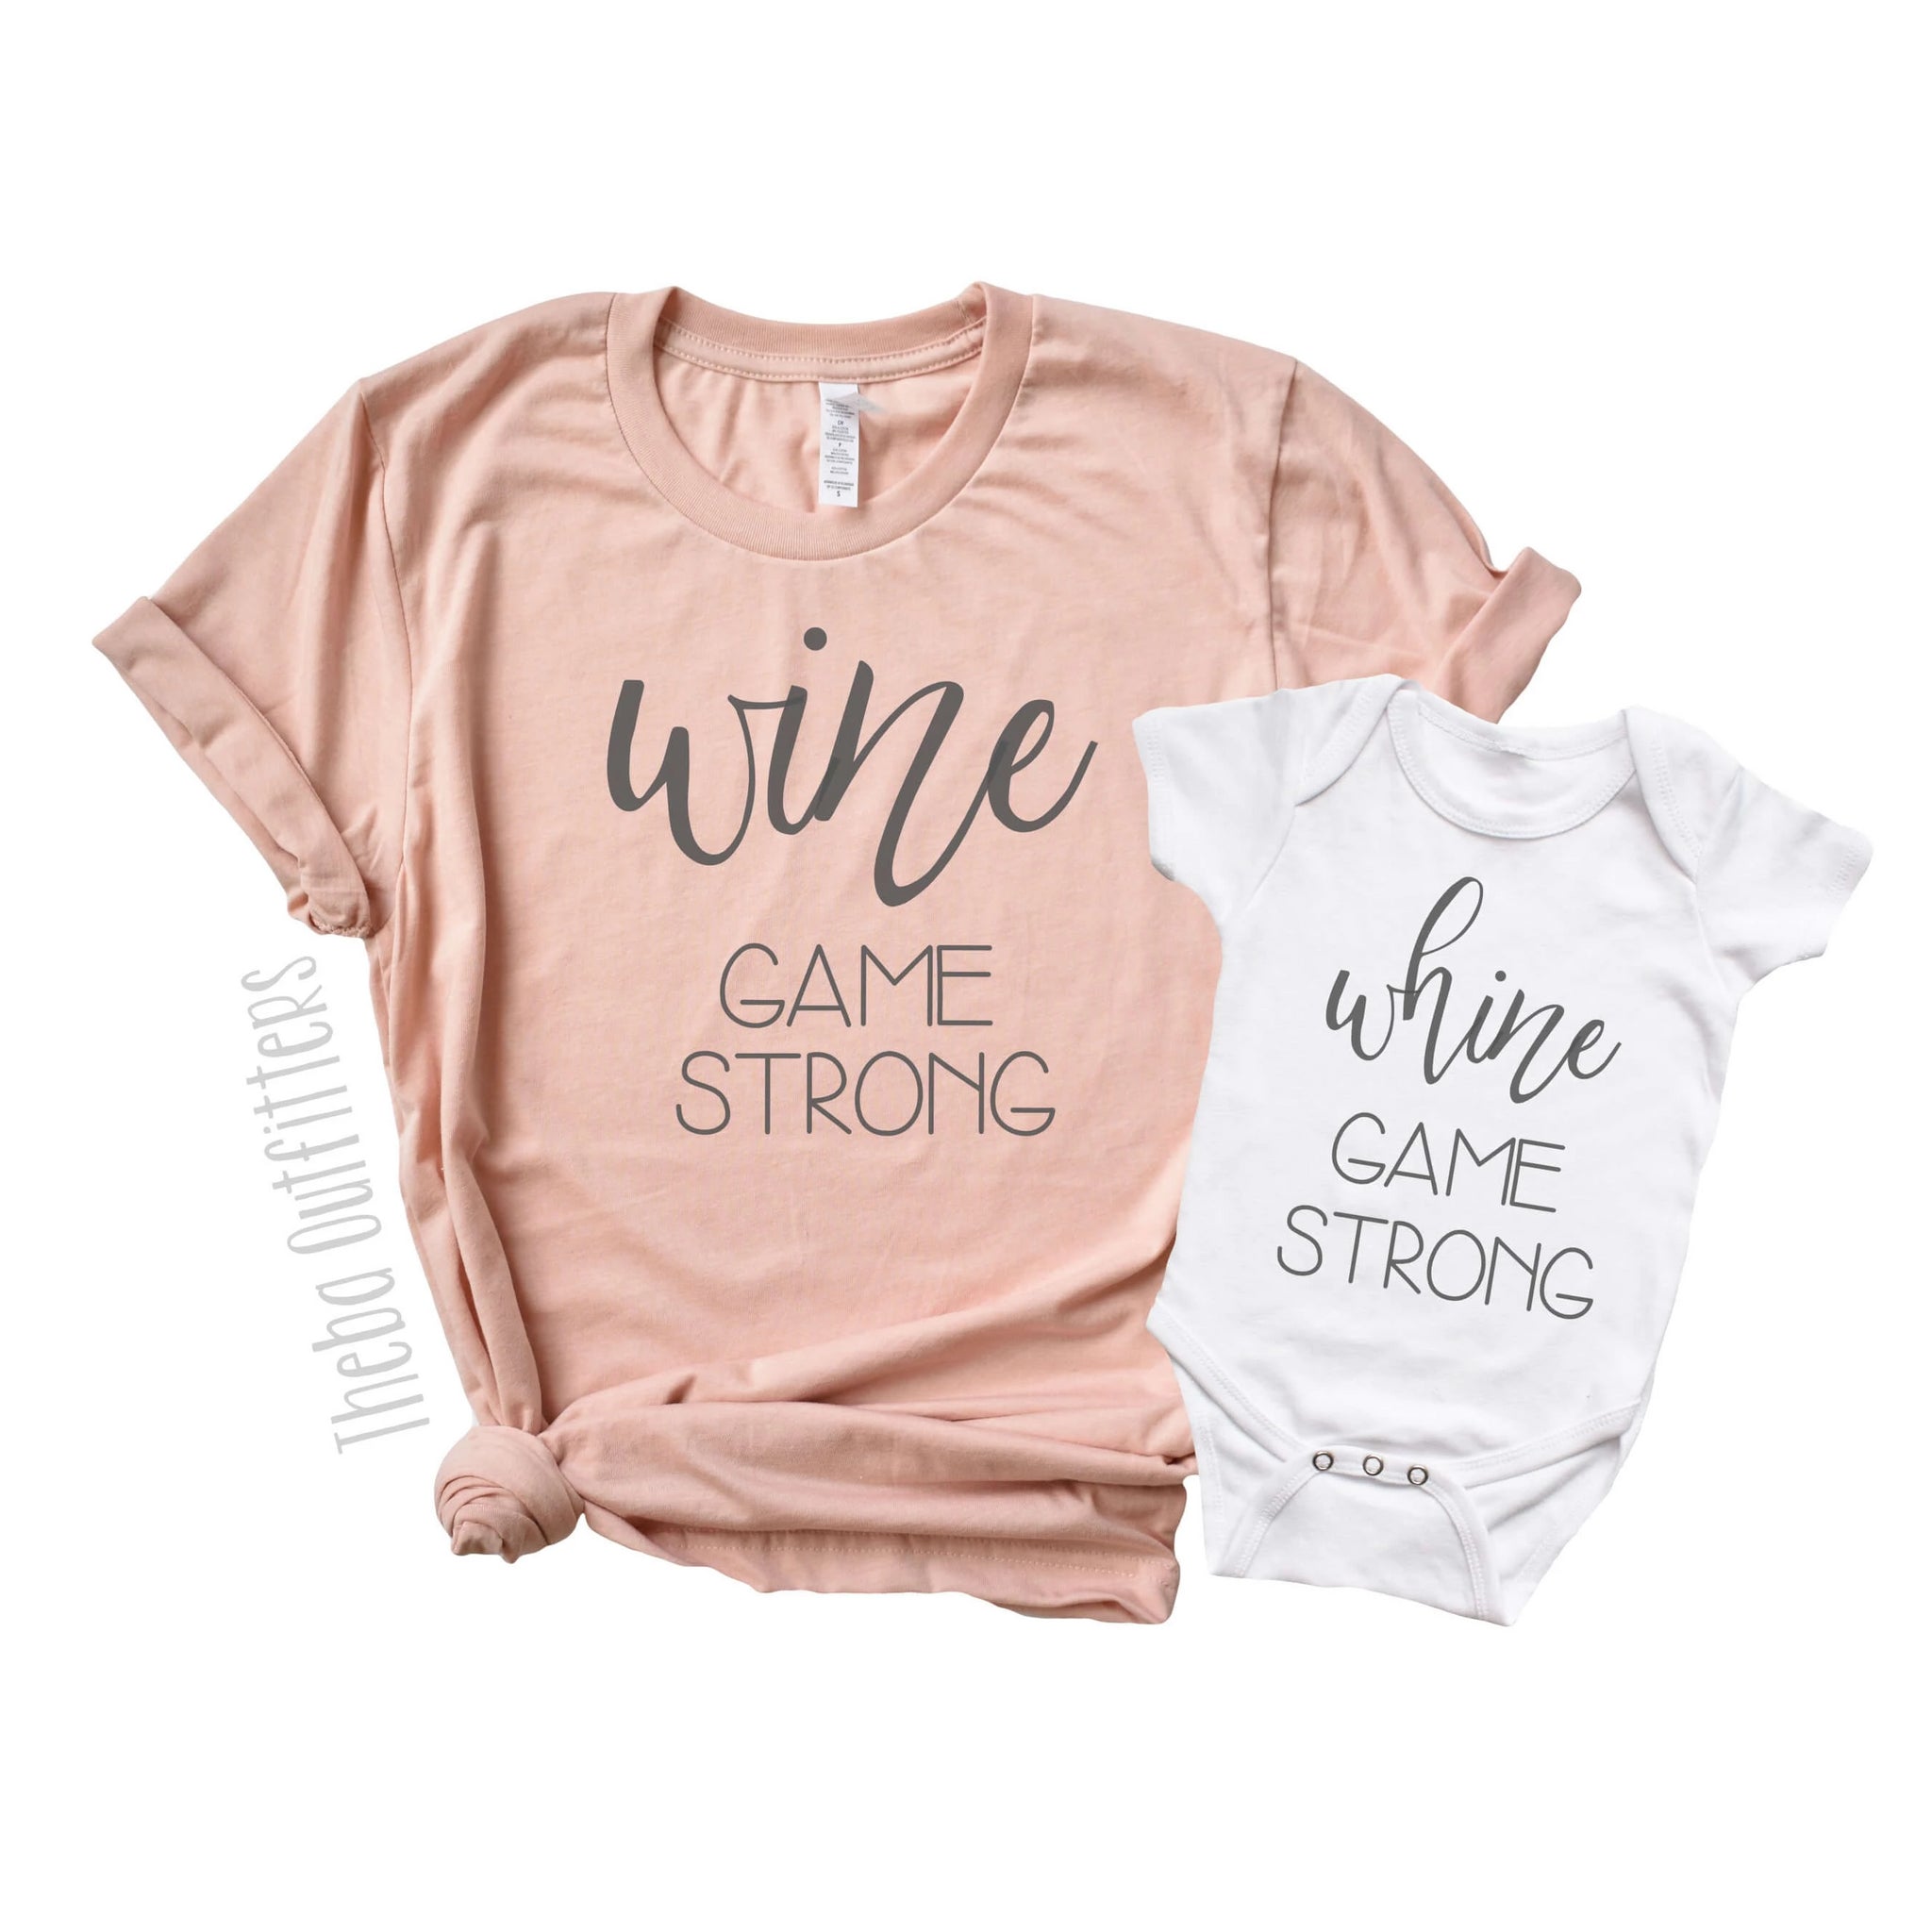 'Whine Game Strong/Wine Game Strong' Mommy & Me Shirts Onesie Bodysuit Theba Outfitters